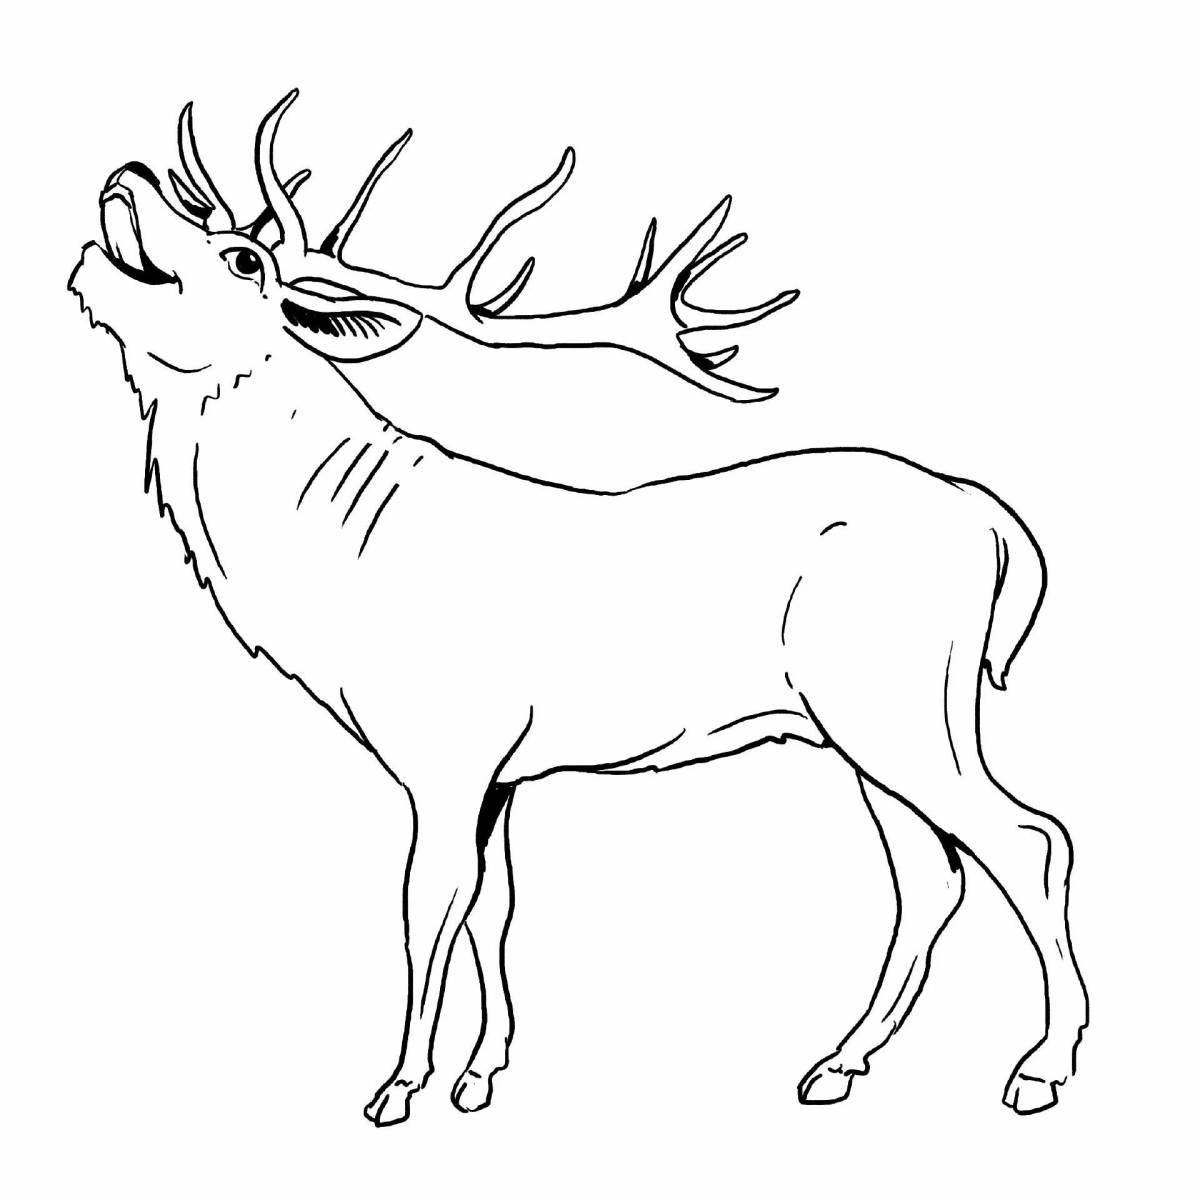 Playful deer coloring page for kids